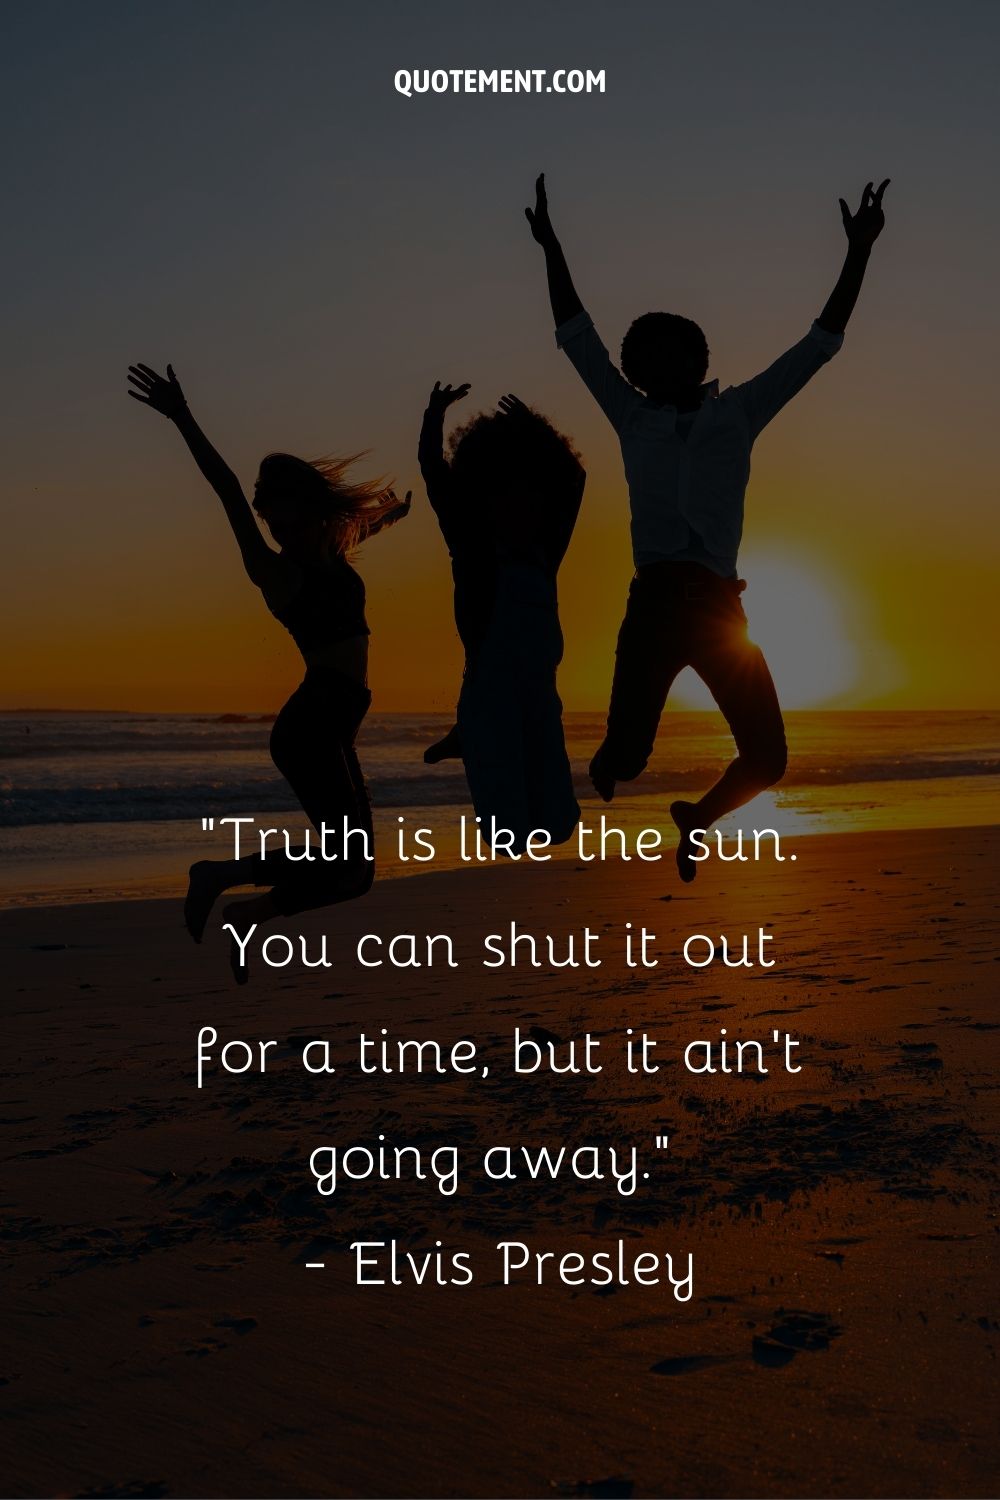 Truth is like the sun. You can shut it out for a time, but it ain't going away